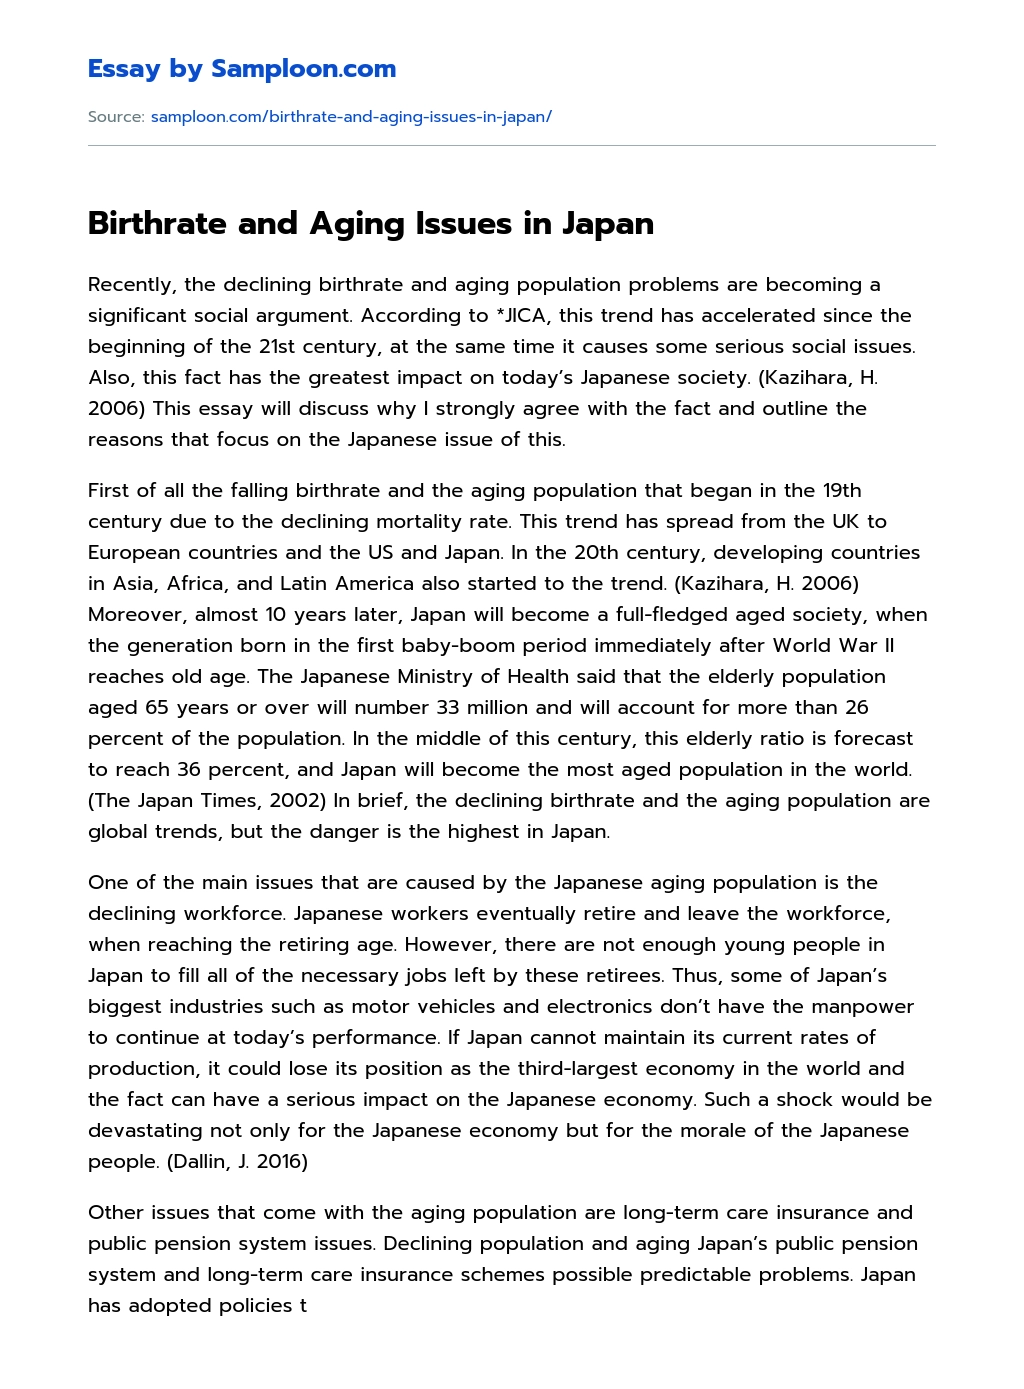 Birthrate and Aging Issues in Japan essay